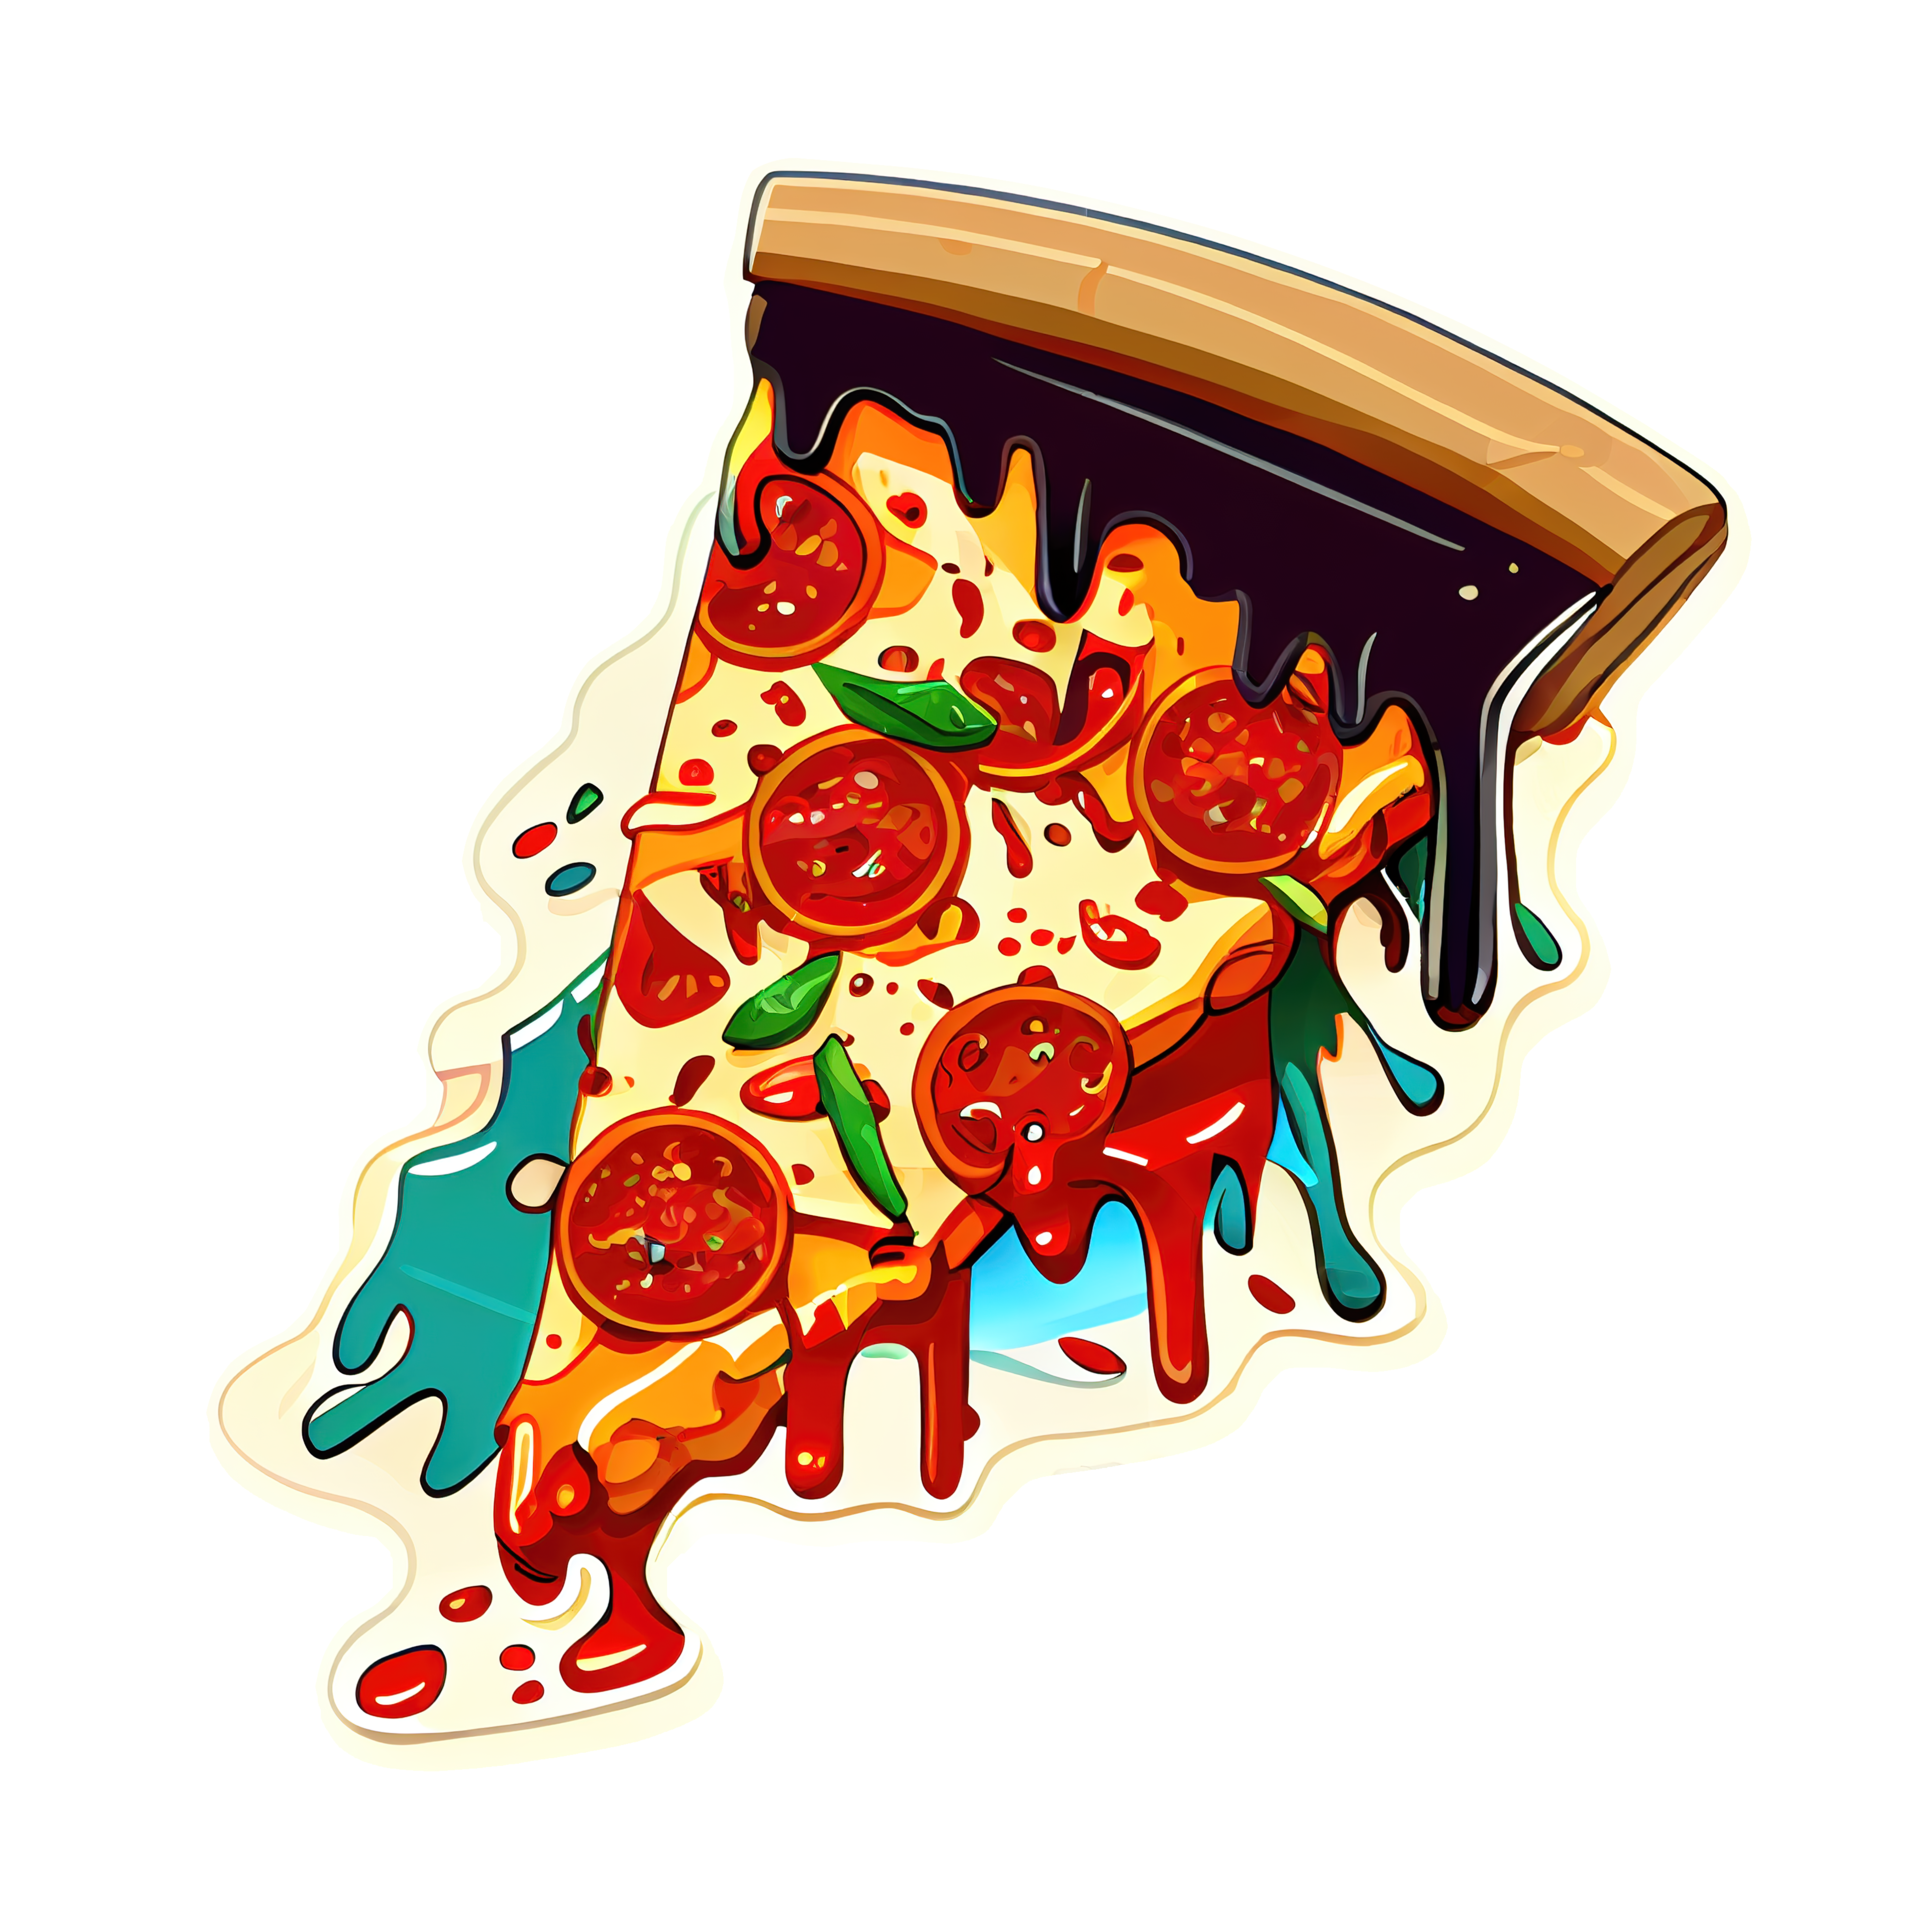 Free Pizza Italian dish with tomato sauce, cheese, and various toppings.  Cartoon sticker pizza. 17293734 PNG with Transparent Background